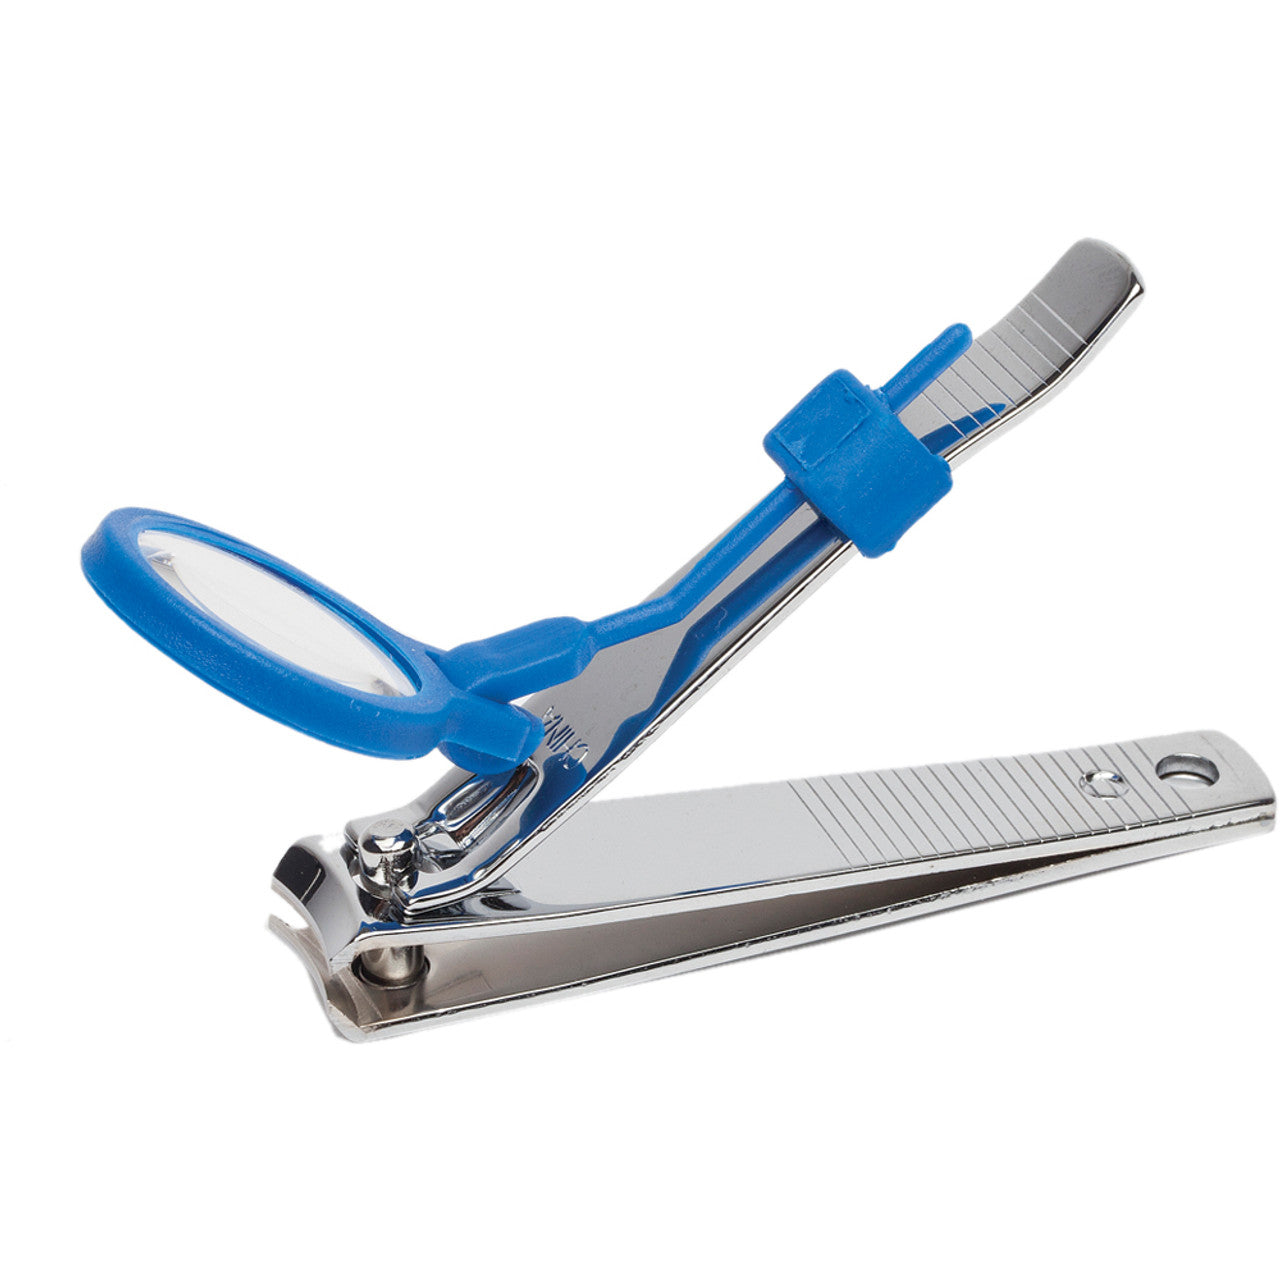 A pair of nail clippers with a little blue magnifier to prevent you from clipping the little piggies